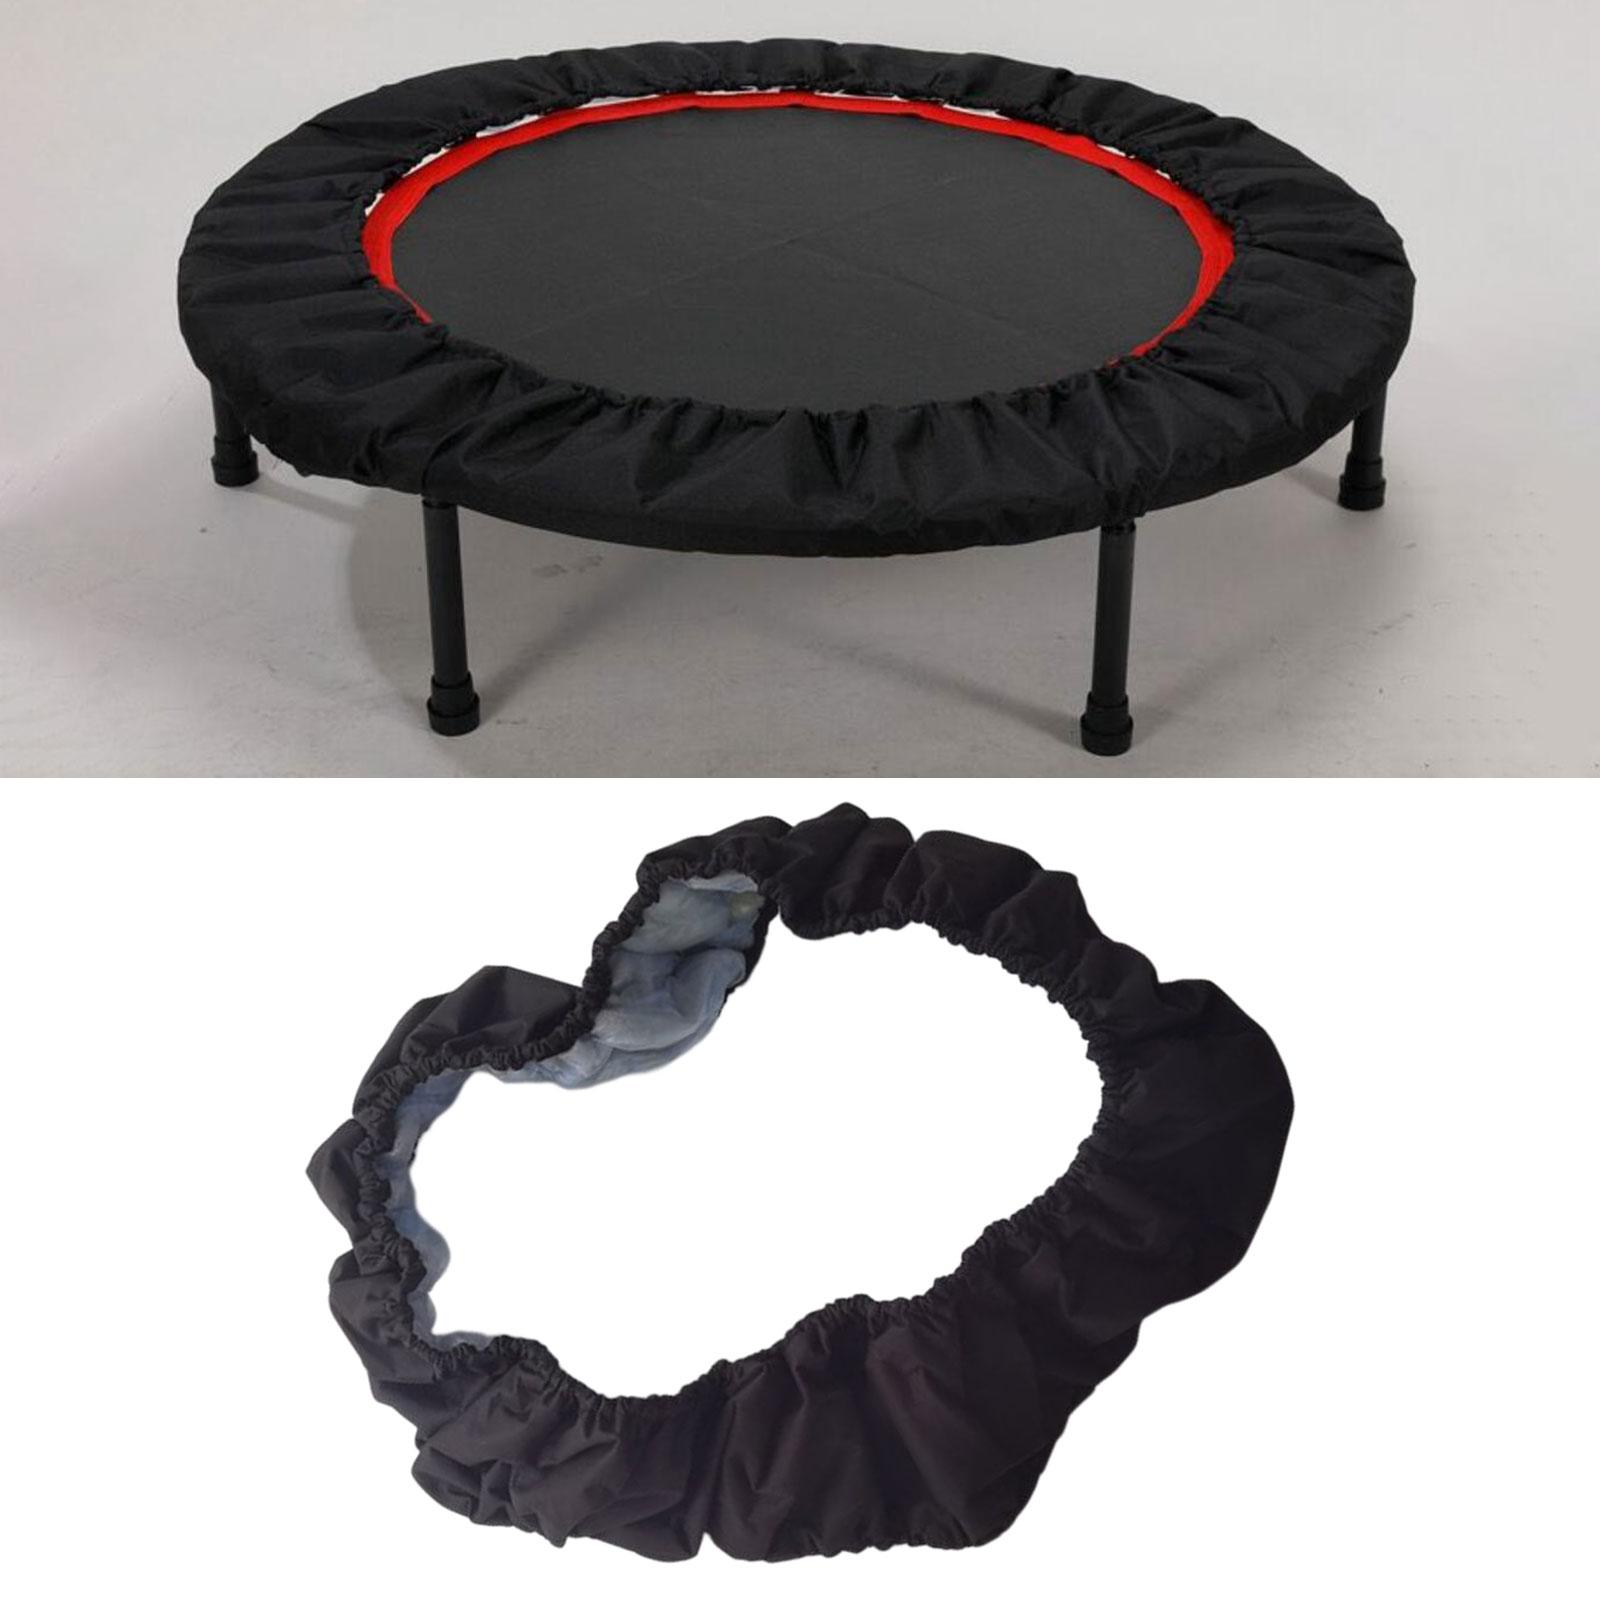 Trampoline Spring Cover Jumping Bed Cover Round Waterproof Easy to Install 54inch 8 Holes